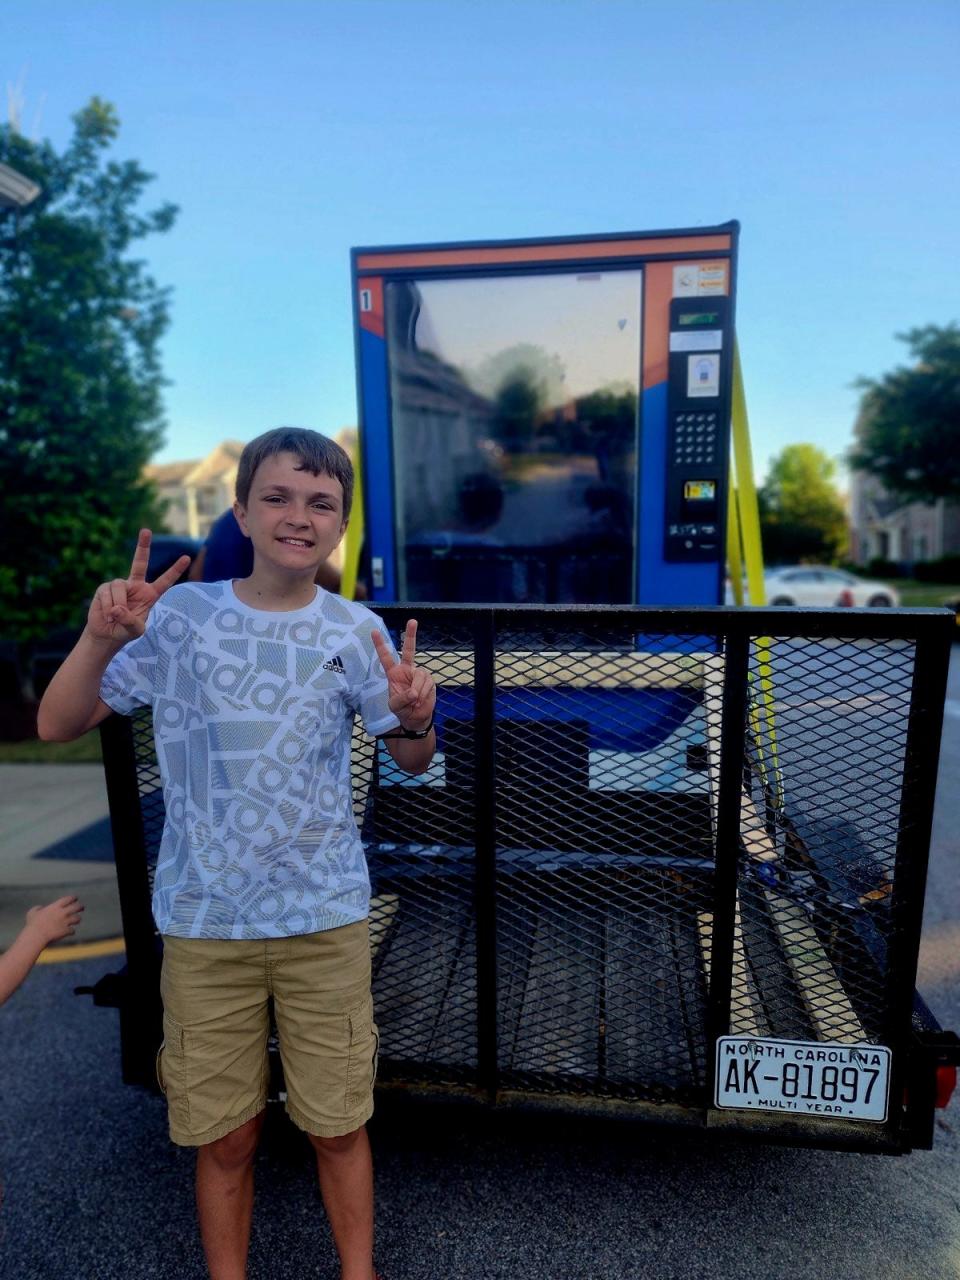 Carter stands with a vending machine that he hopes will help raise funds to pay for his special needs education at   Fayetteville's only autism school.